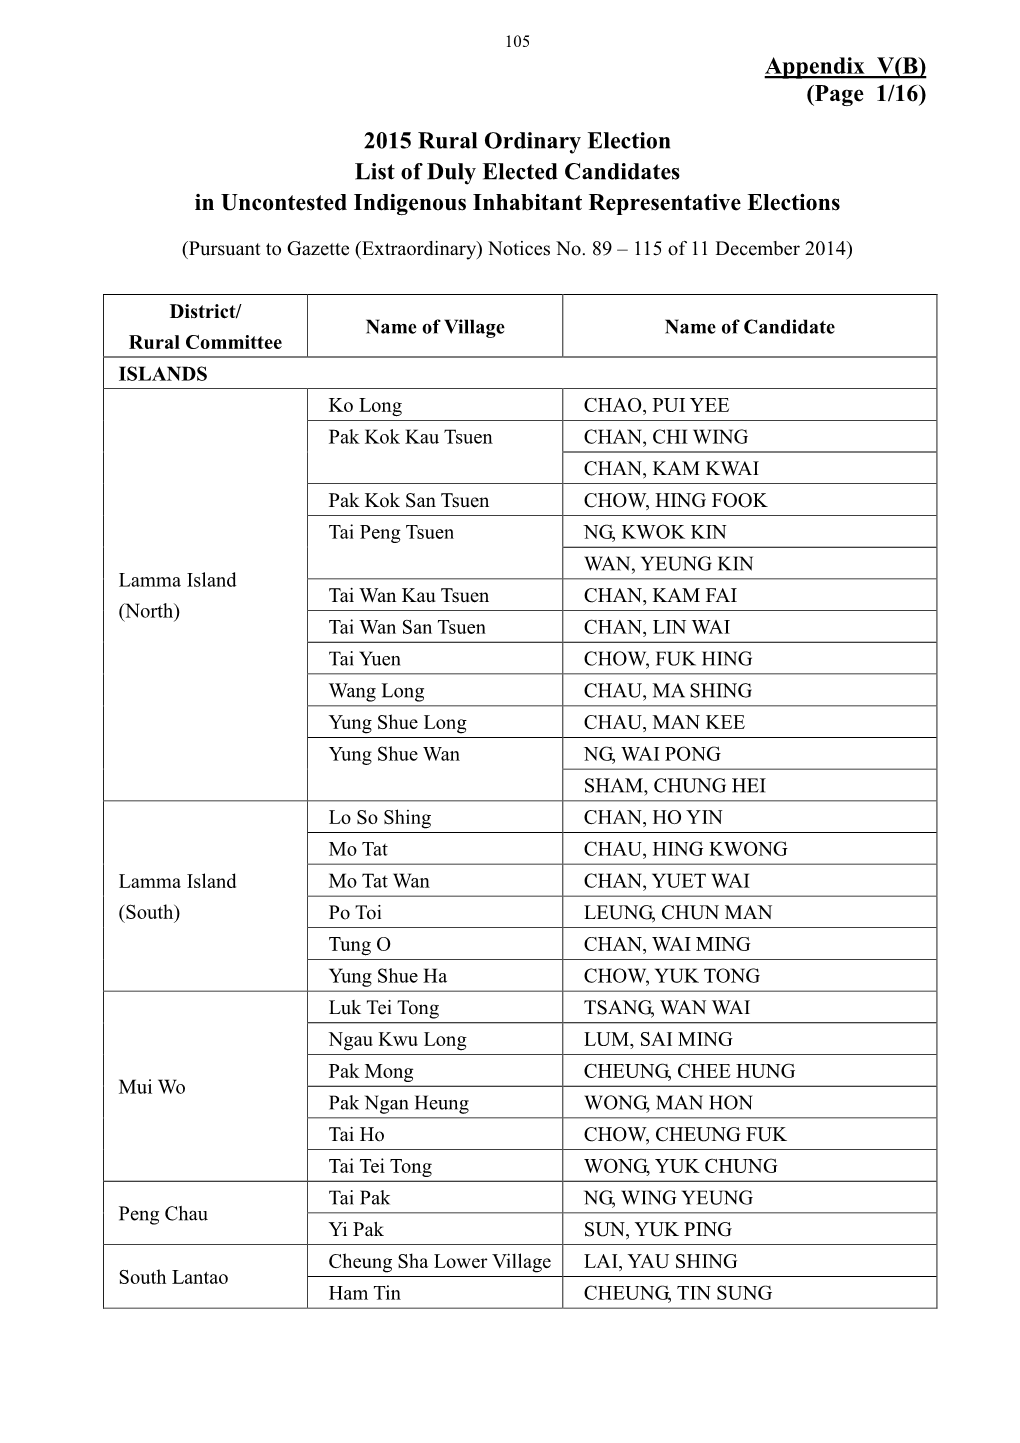 Appendix V(B) (Page 1/16) 2015 Rural Ordinary Election List of Duly Elected Candidates in Uncontested Indigenous Inhabitant Representative Elections